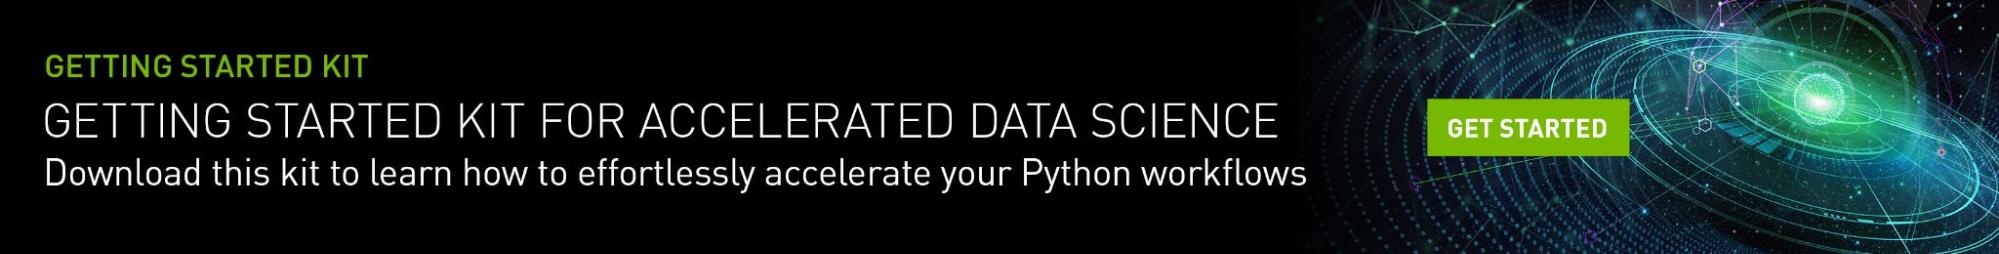 Ad for Getting Started Kit for Accelerated Data Science